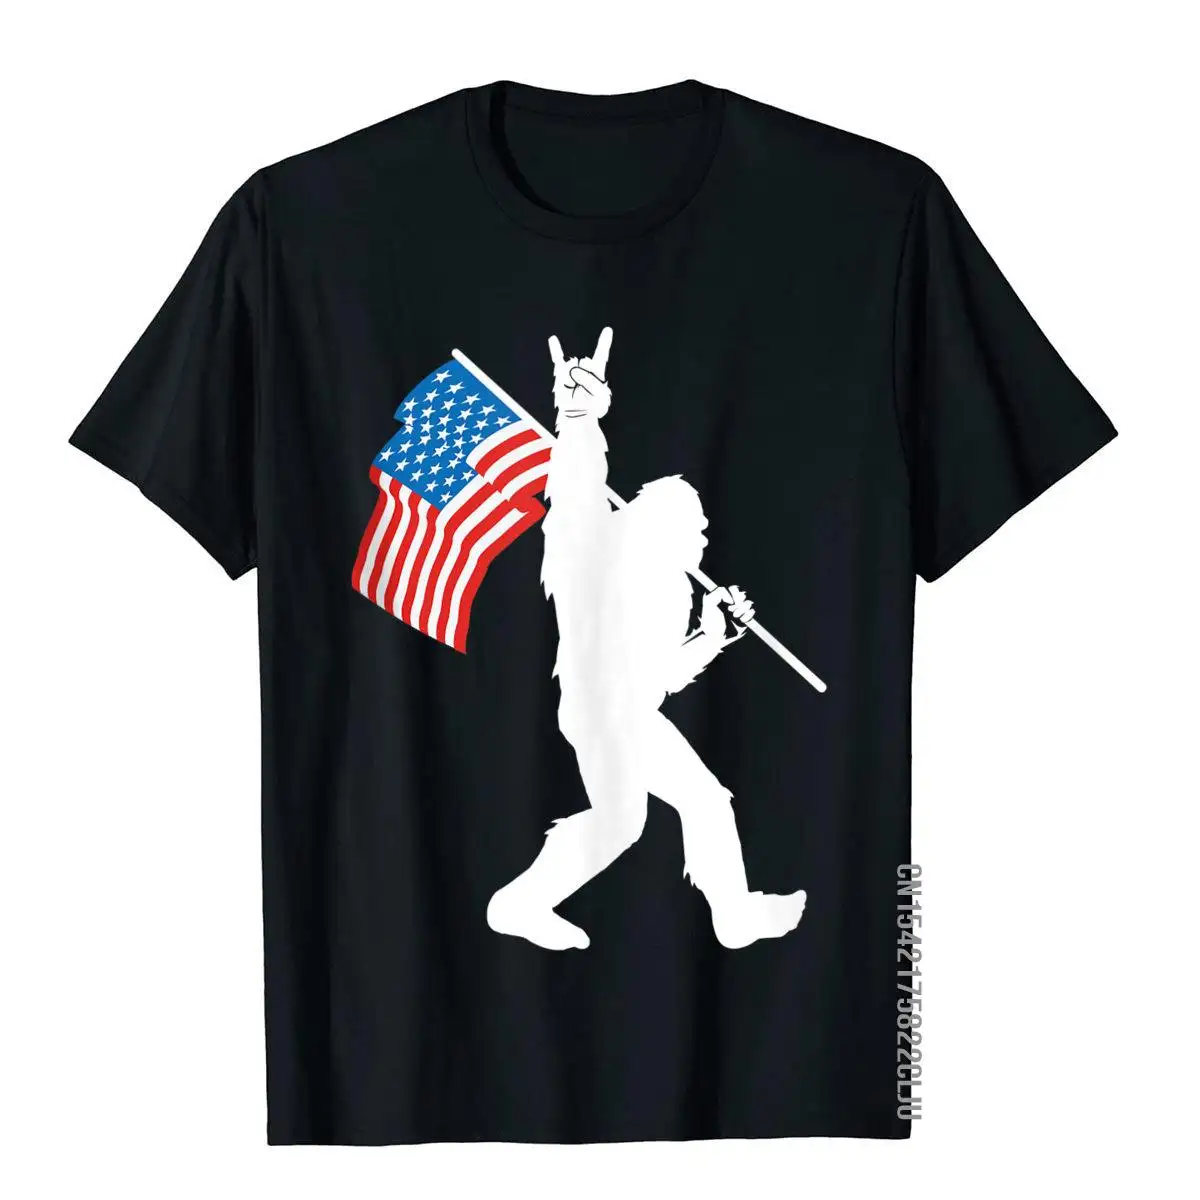 Funny Bigfoot Rock And Roll USA Flag For Sasquatch Believers Fitness Tops Shirt For Men Cotton Top T-Shirts High Quality